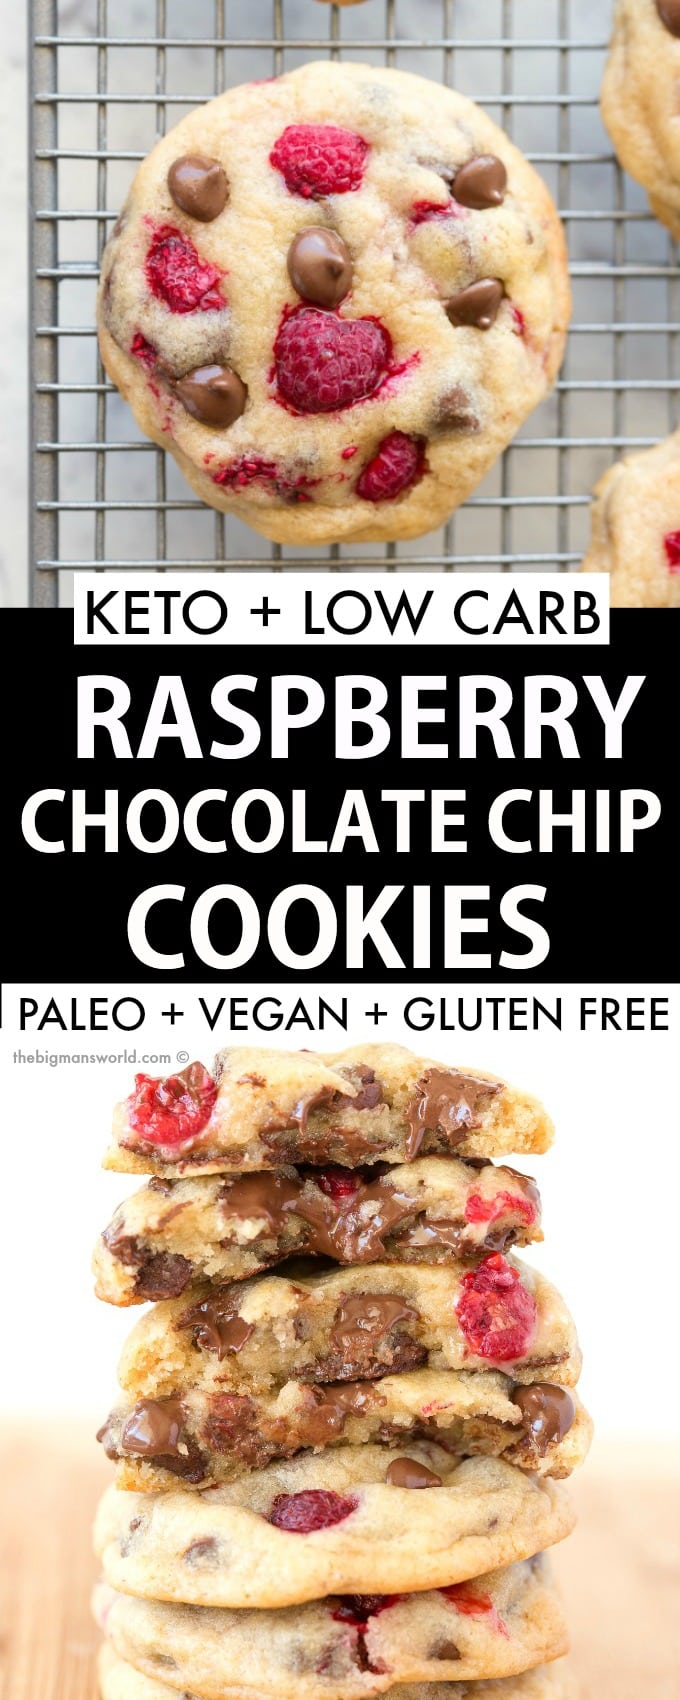 Raspberry Chocolate Chip Cookies are a delicious keto, vegan and paleo cookie recipe that are soft, chewy and loaded with raspberries